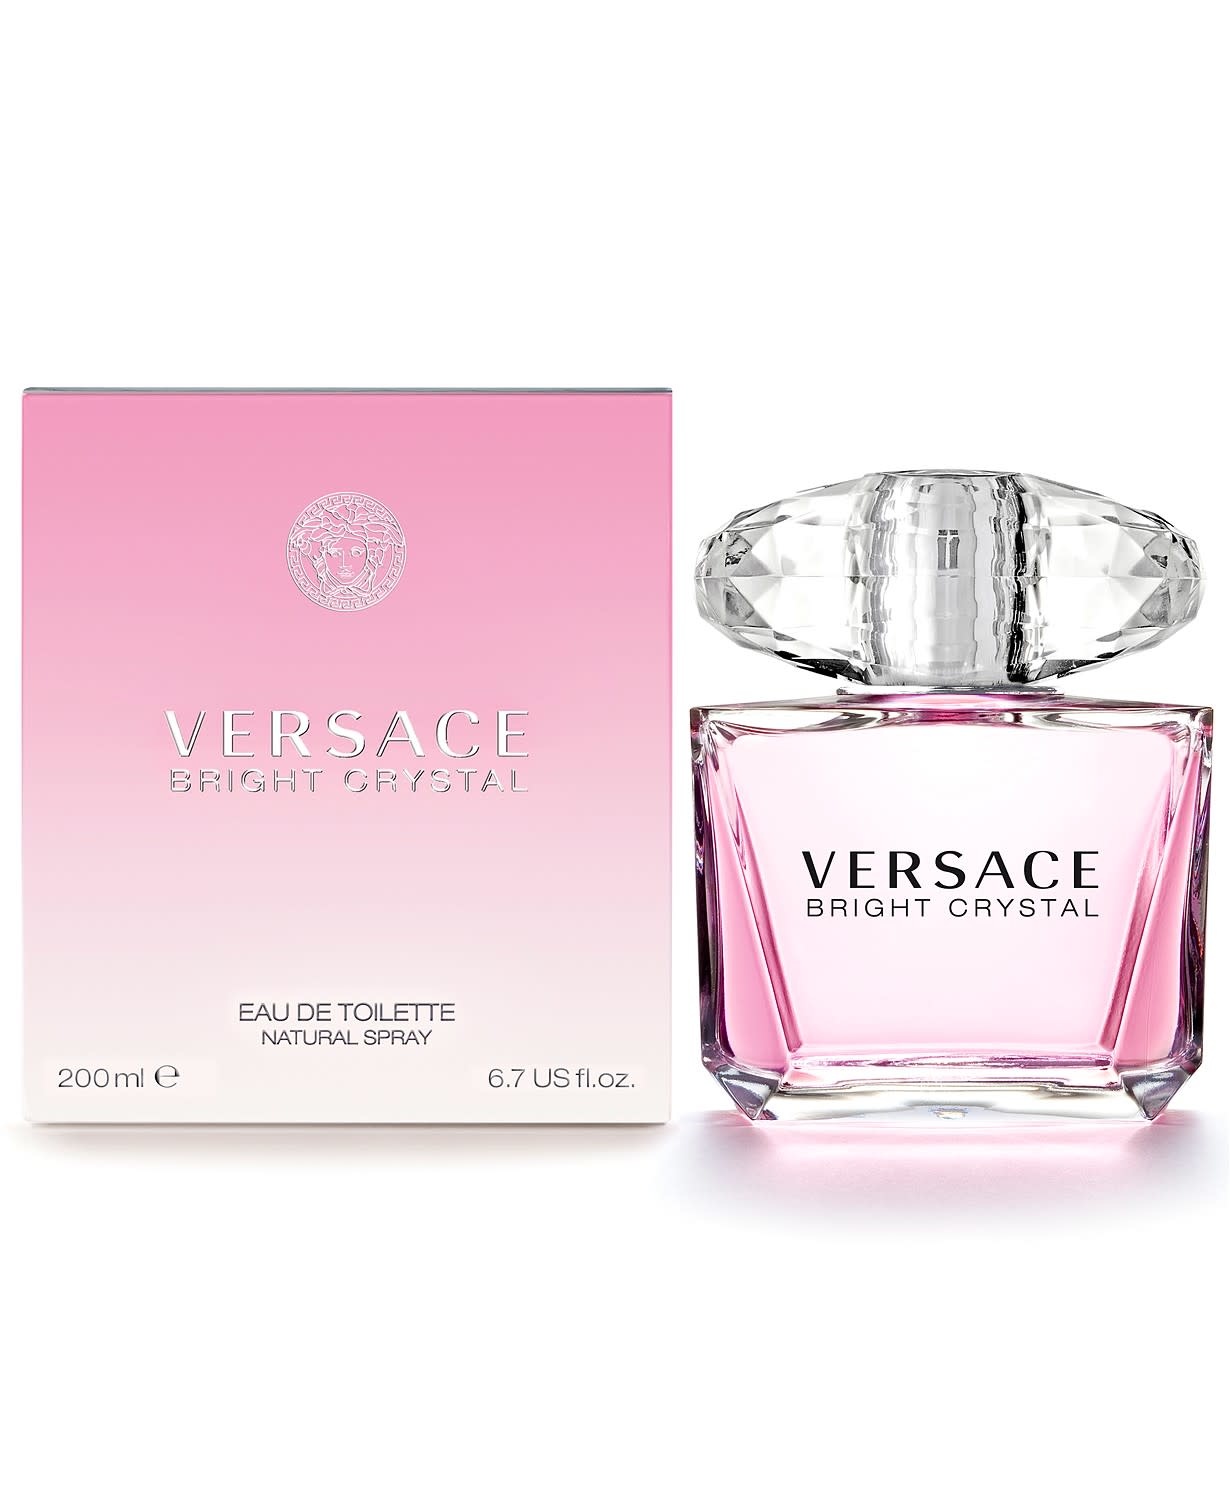 Versace for Women - Bright Crystal EdT - The Scent Masters